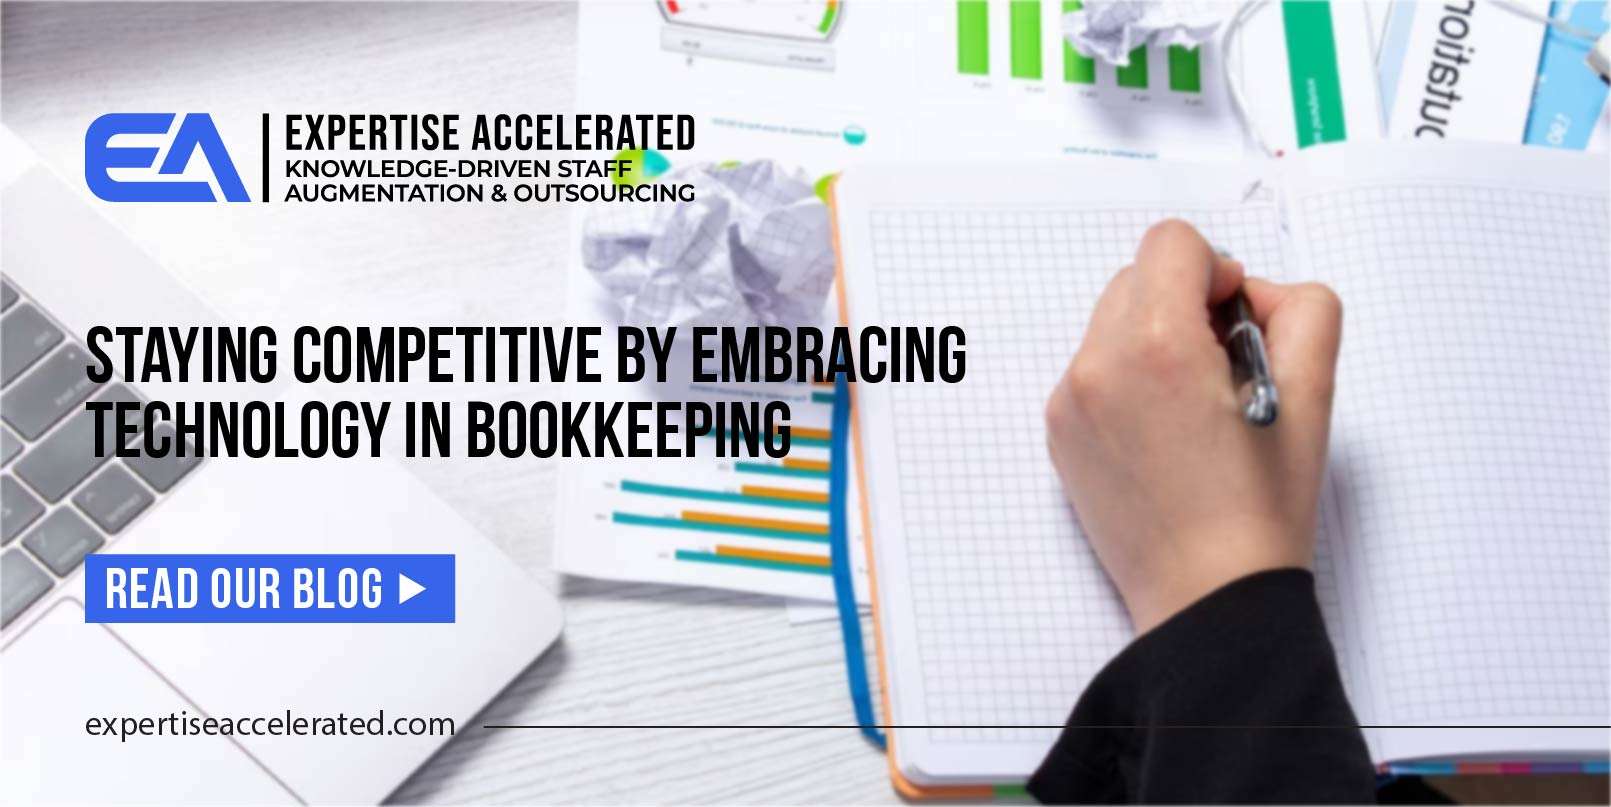 Embrace Technology in Bookkeeping & Stay Competitive